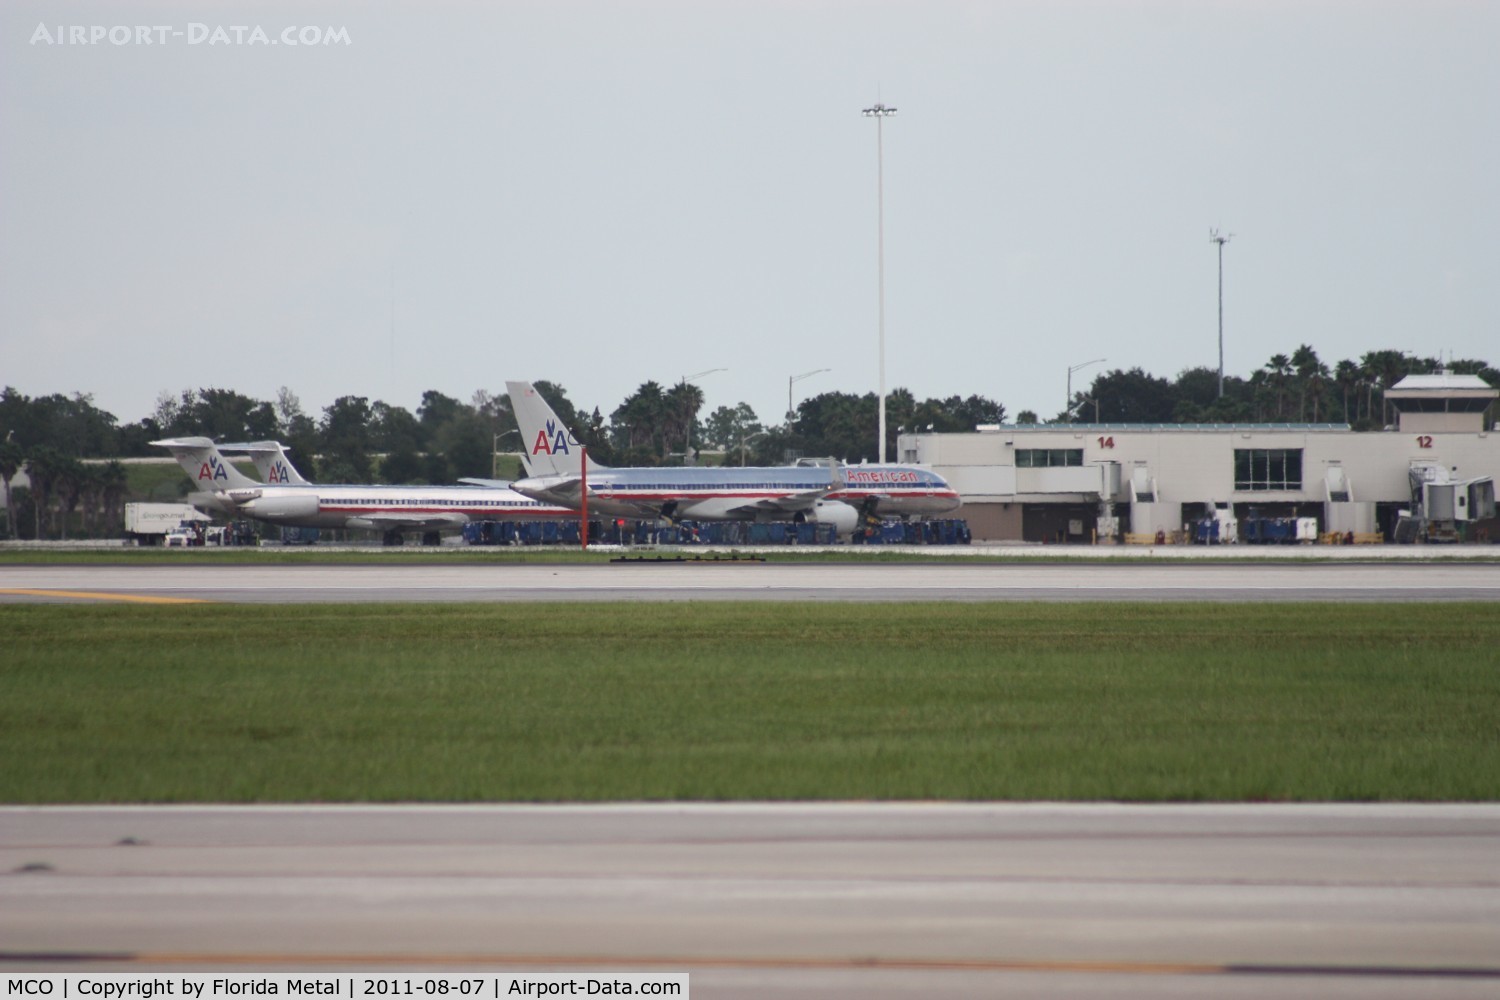 Orlando International Airport (MCO) - Airside 1 with American Airlines